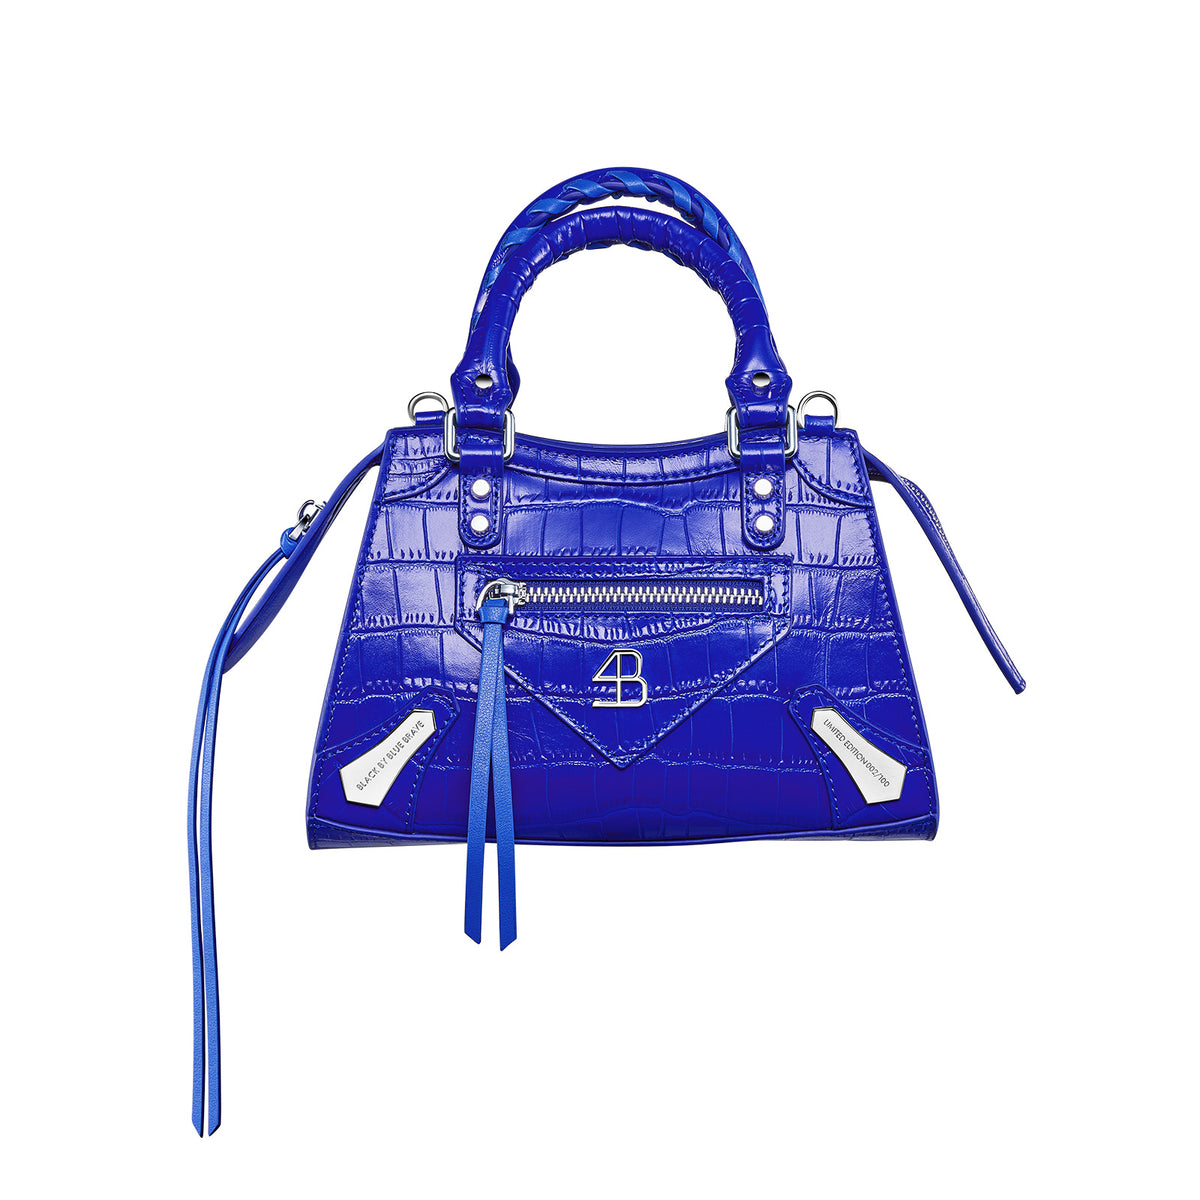 313 BLUE SMALL LEATHER HANDBAG (LIMITED EDITION) - BLACK BY BLUE BRAVE